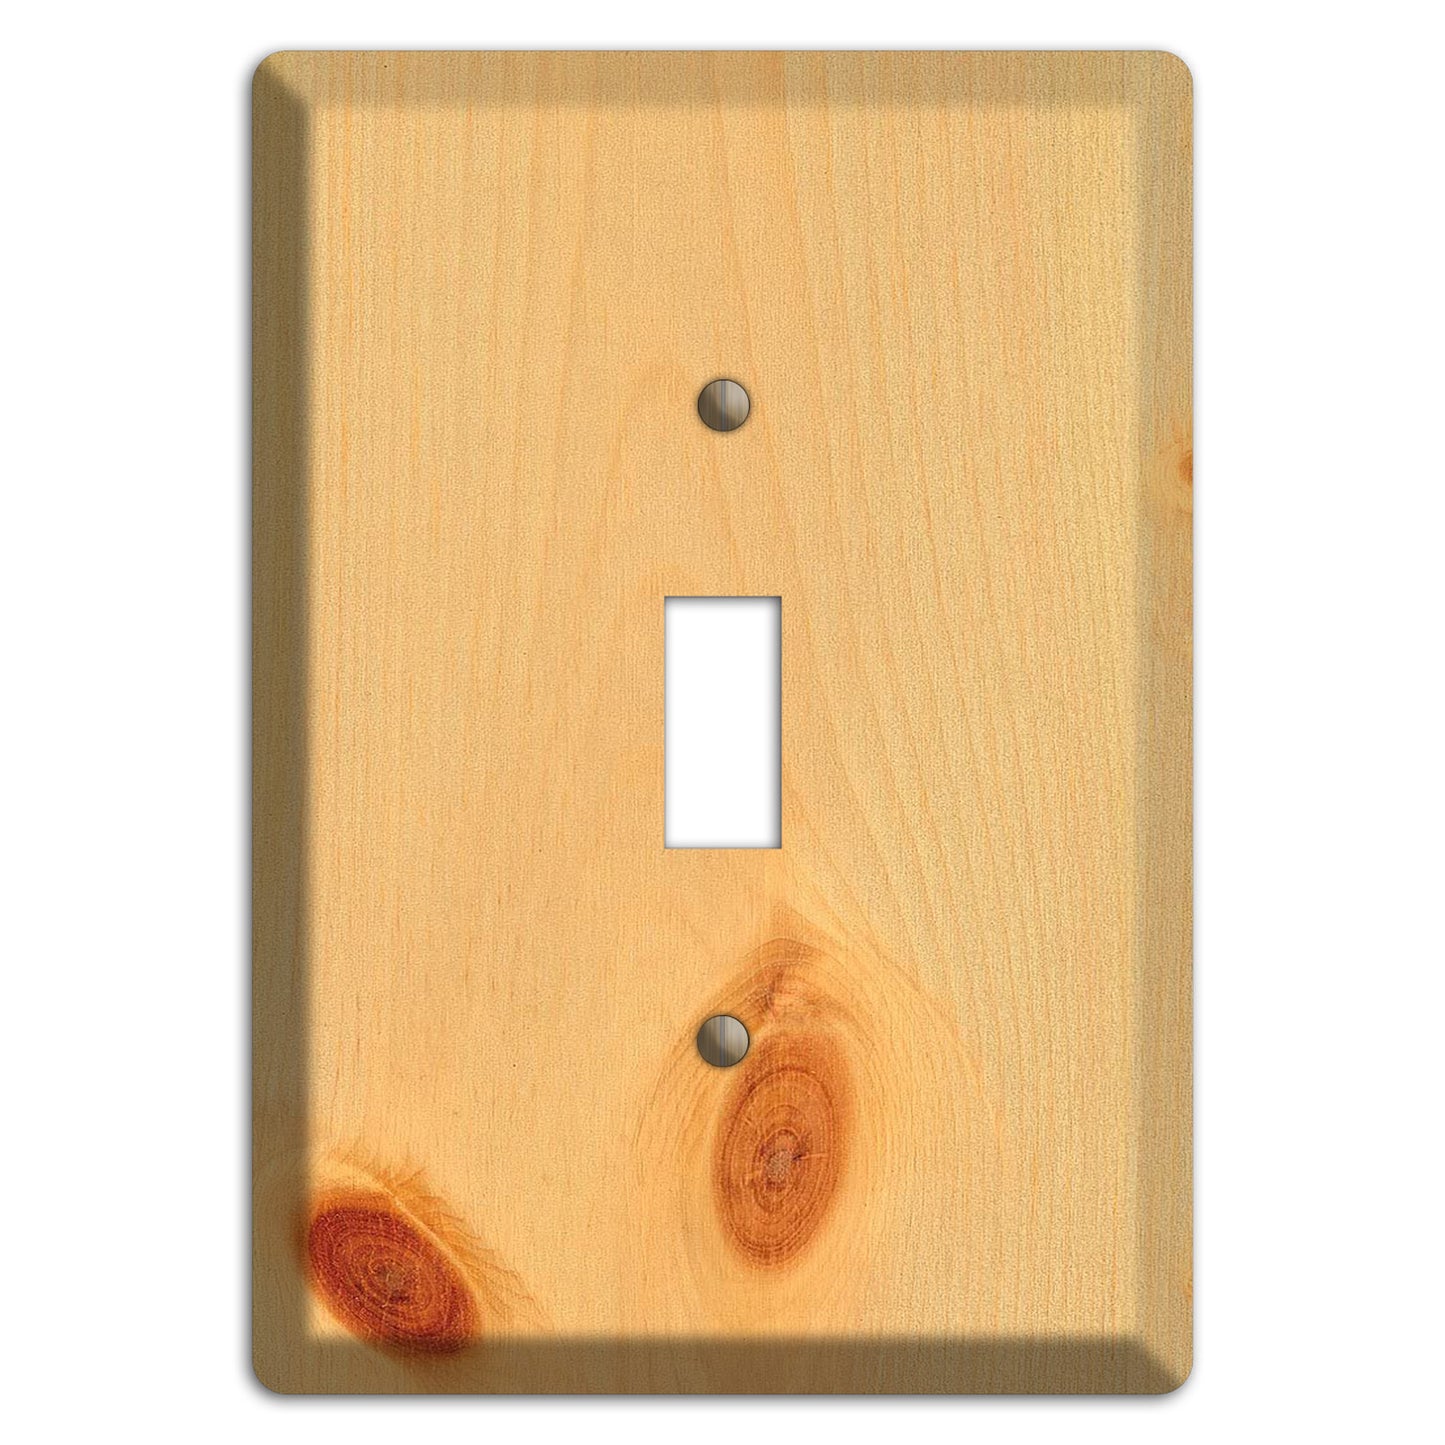 Pine Wood Cover Plates